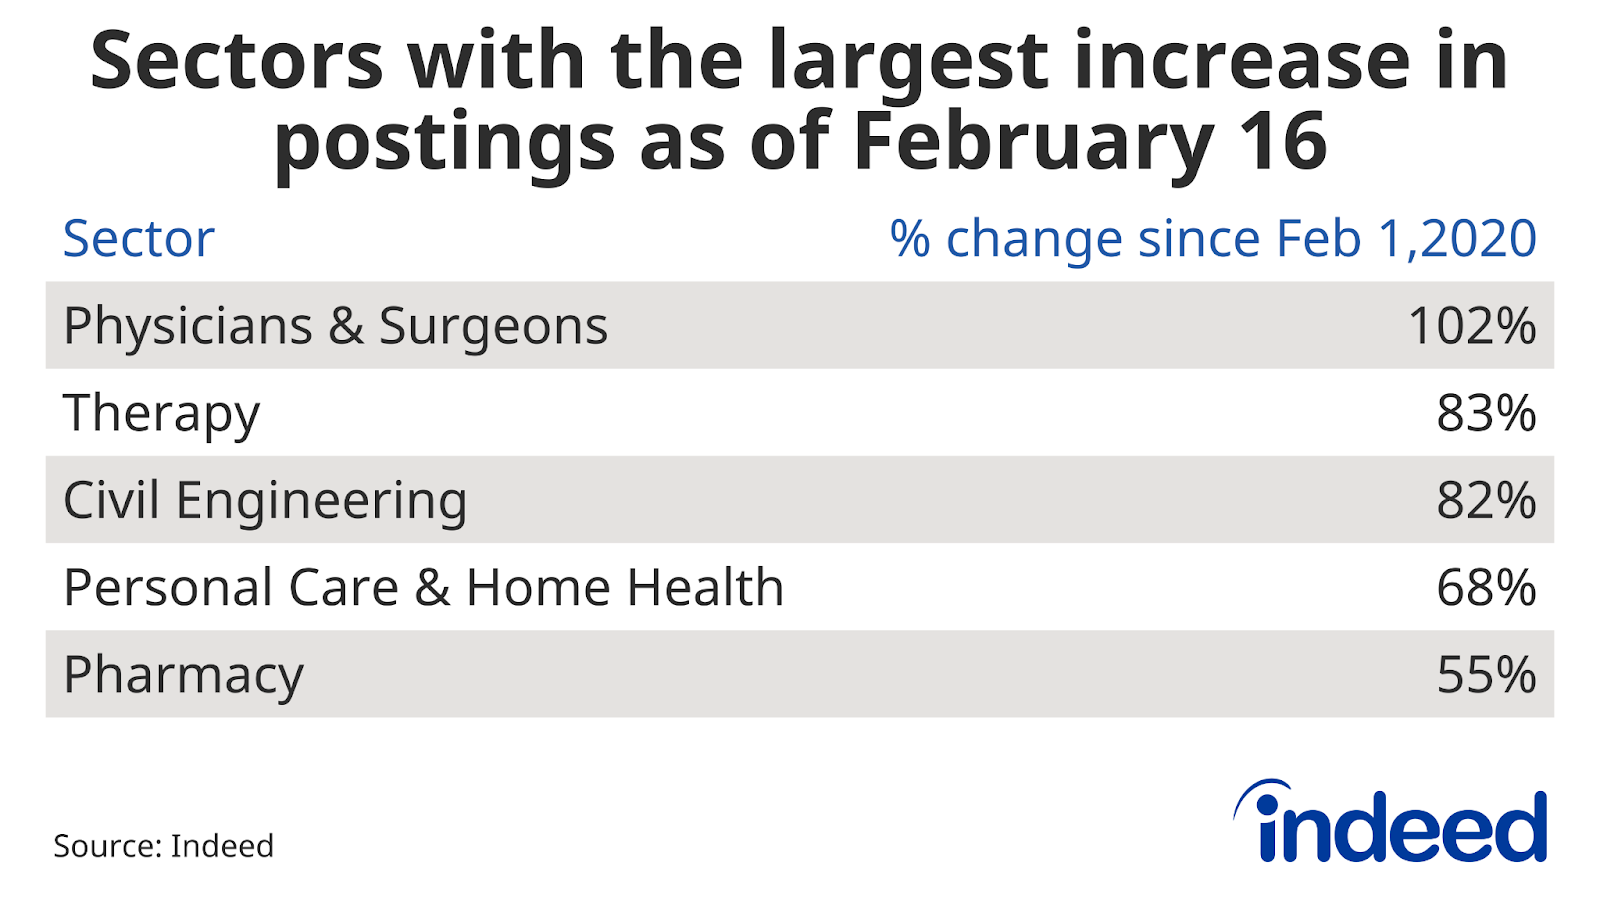 Chart titled “Sectors with the largest increase in postings as of February 16, 2024” with columns named “Sector,” and “% change since Feb. 1, 2020.” Indeed tracked the sectors with the largest increase in job postings since Feb. 1, 2020. Physicians & Surgeons had the largest increase at 102% followed by Therapy at 83%.